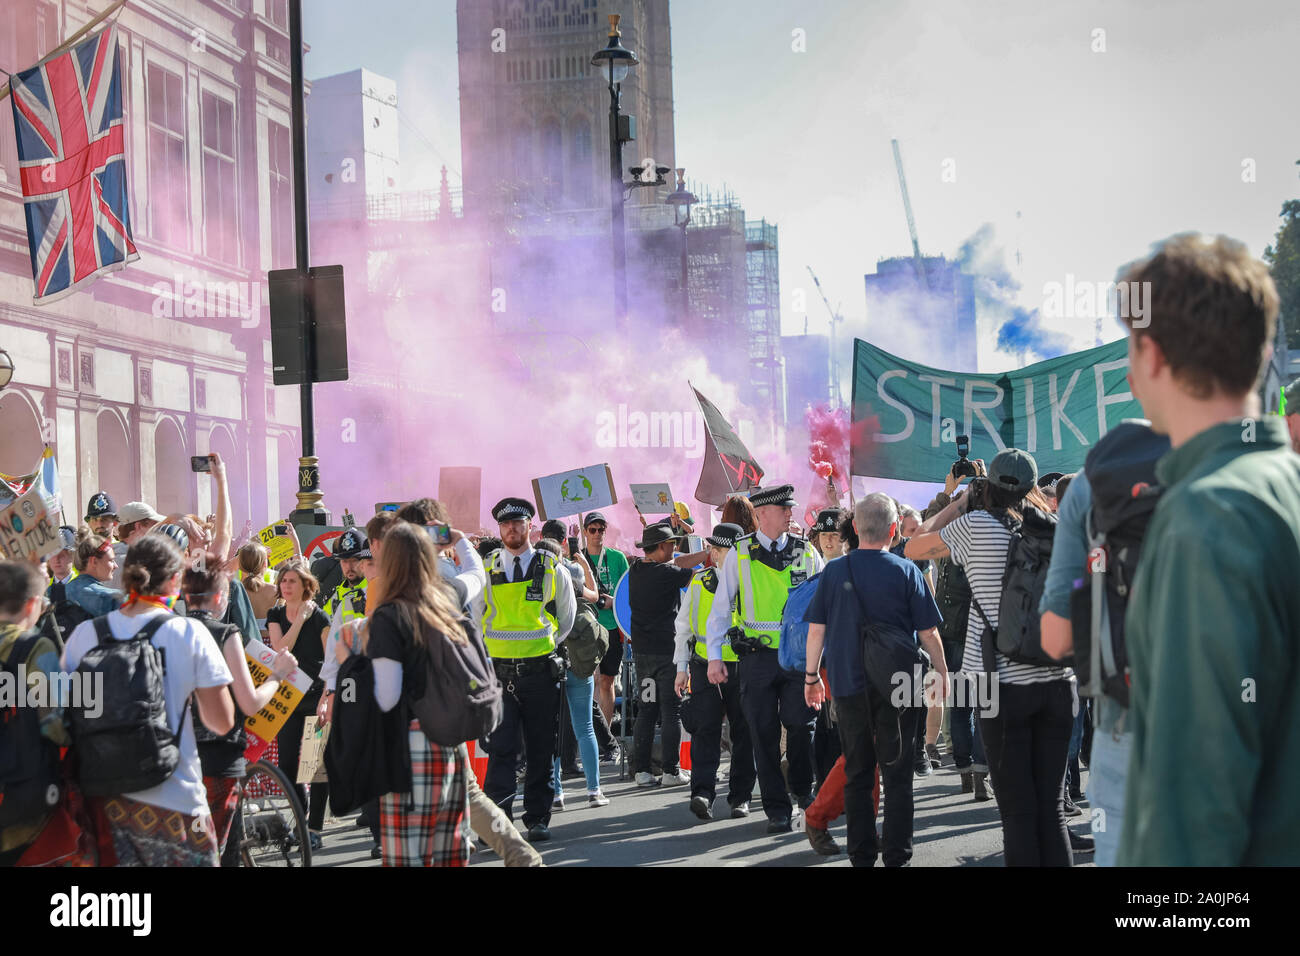 Westminster, London, UK, 20th Sep 2019. As the afternoon progresses, protesters make their way down Whitehall, and towards Trafalgar Square. Tens of thousands of children, young people and adults protest for climate action and against the causes of climate change in the British capital. Many similar protests take place in cities around the world in a day of global climate action. Stock Photo